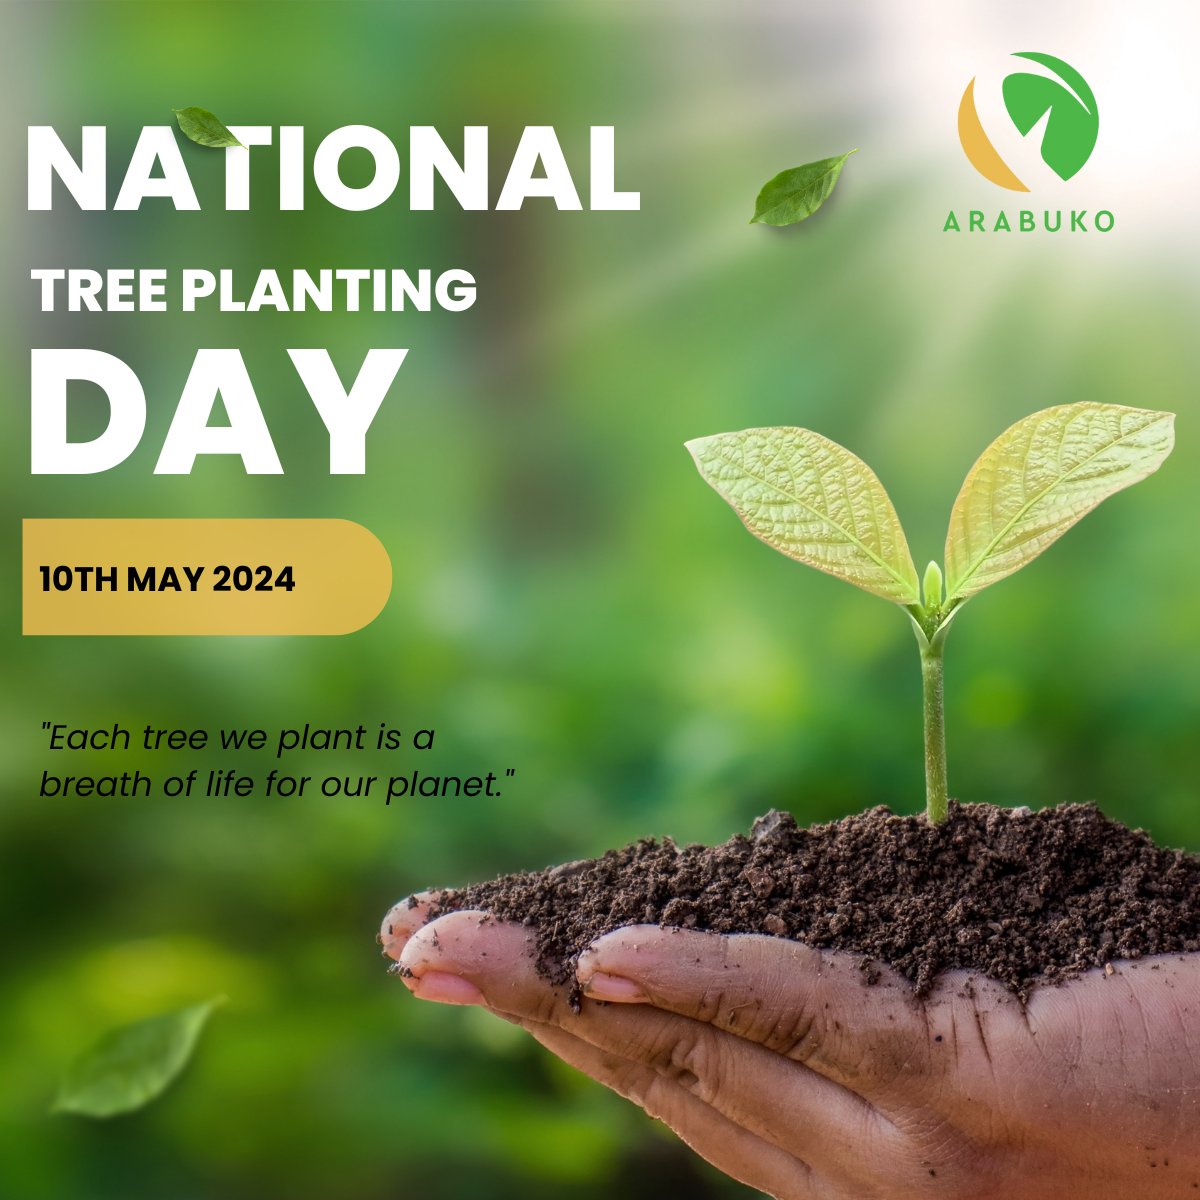 Climate change continues to be a big challenge, especially lately with the ongoing floods. As we plant trees today, let's do it for all the lives impacted by the floods and for our future generations.  Happy National Tree Planting Day!🌳#letssavetheearth #youthinagriculture